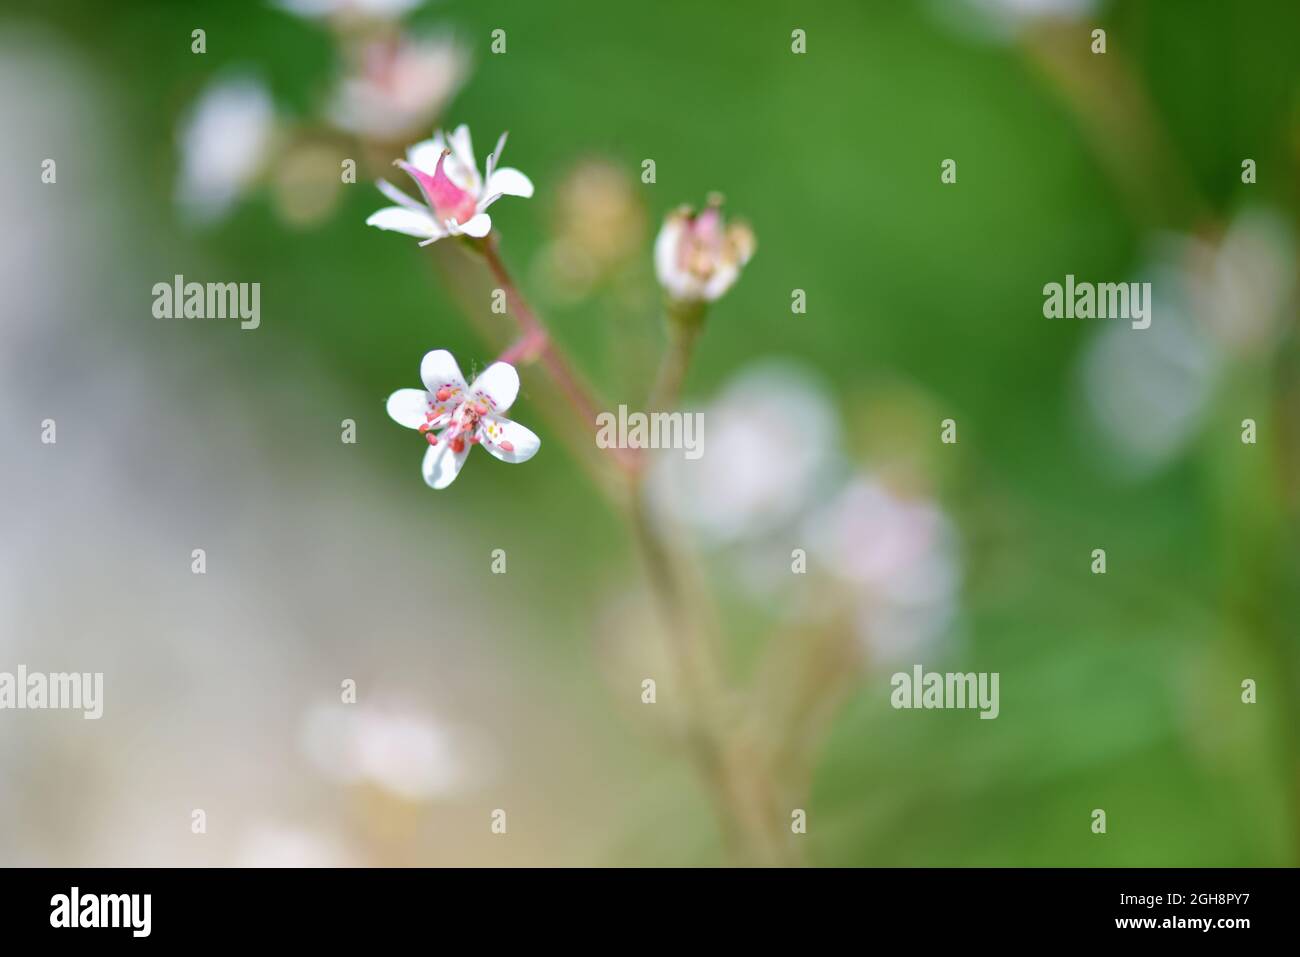 Flowers background. Flowers Saxifraga closeup on natural background. Soft focus Stock Photo